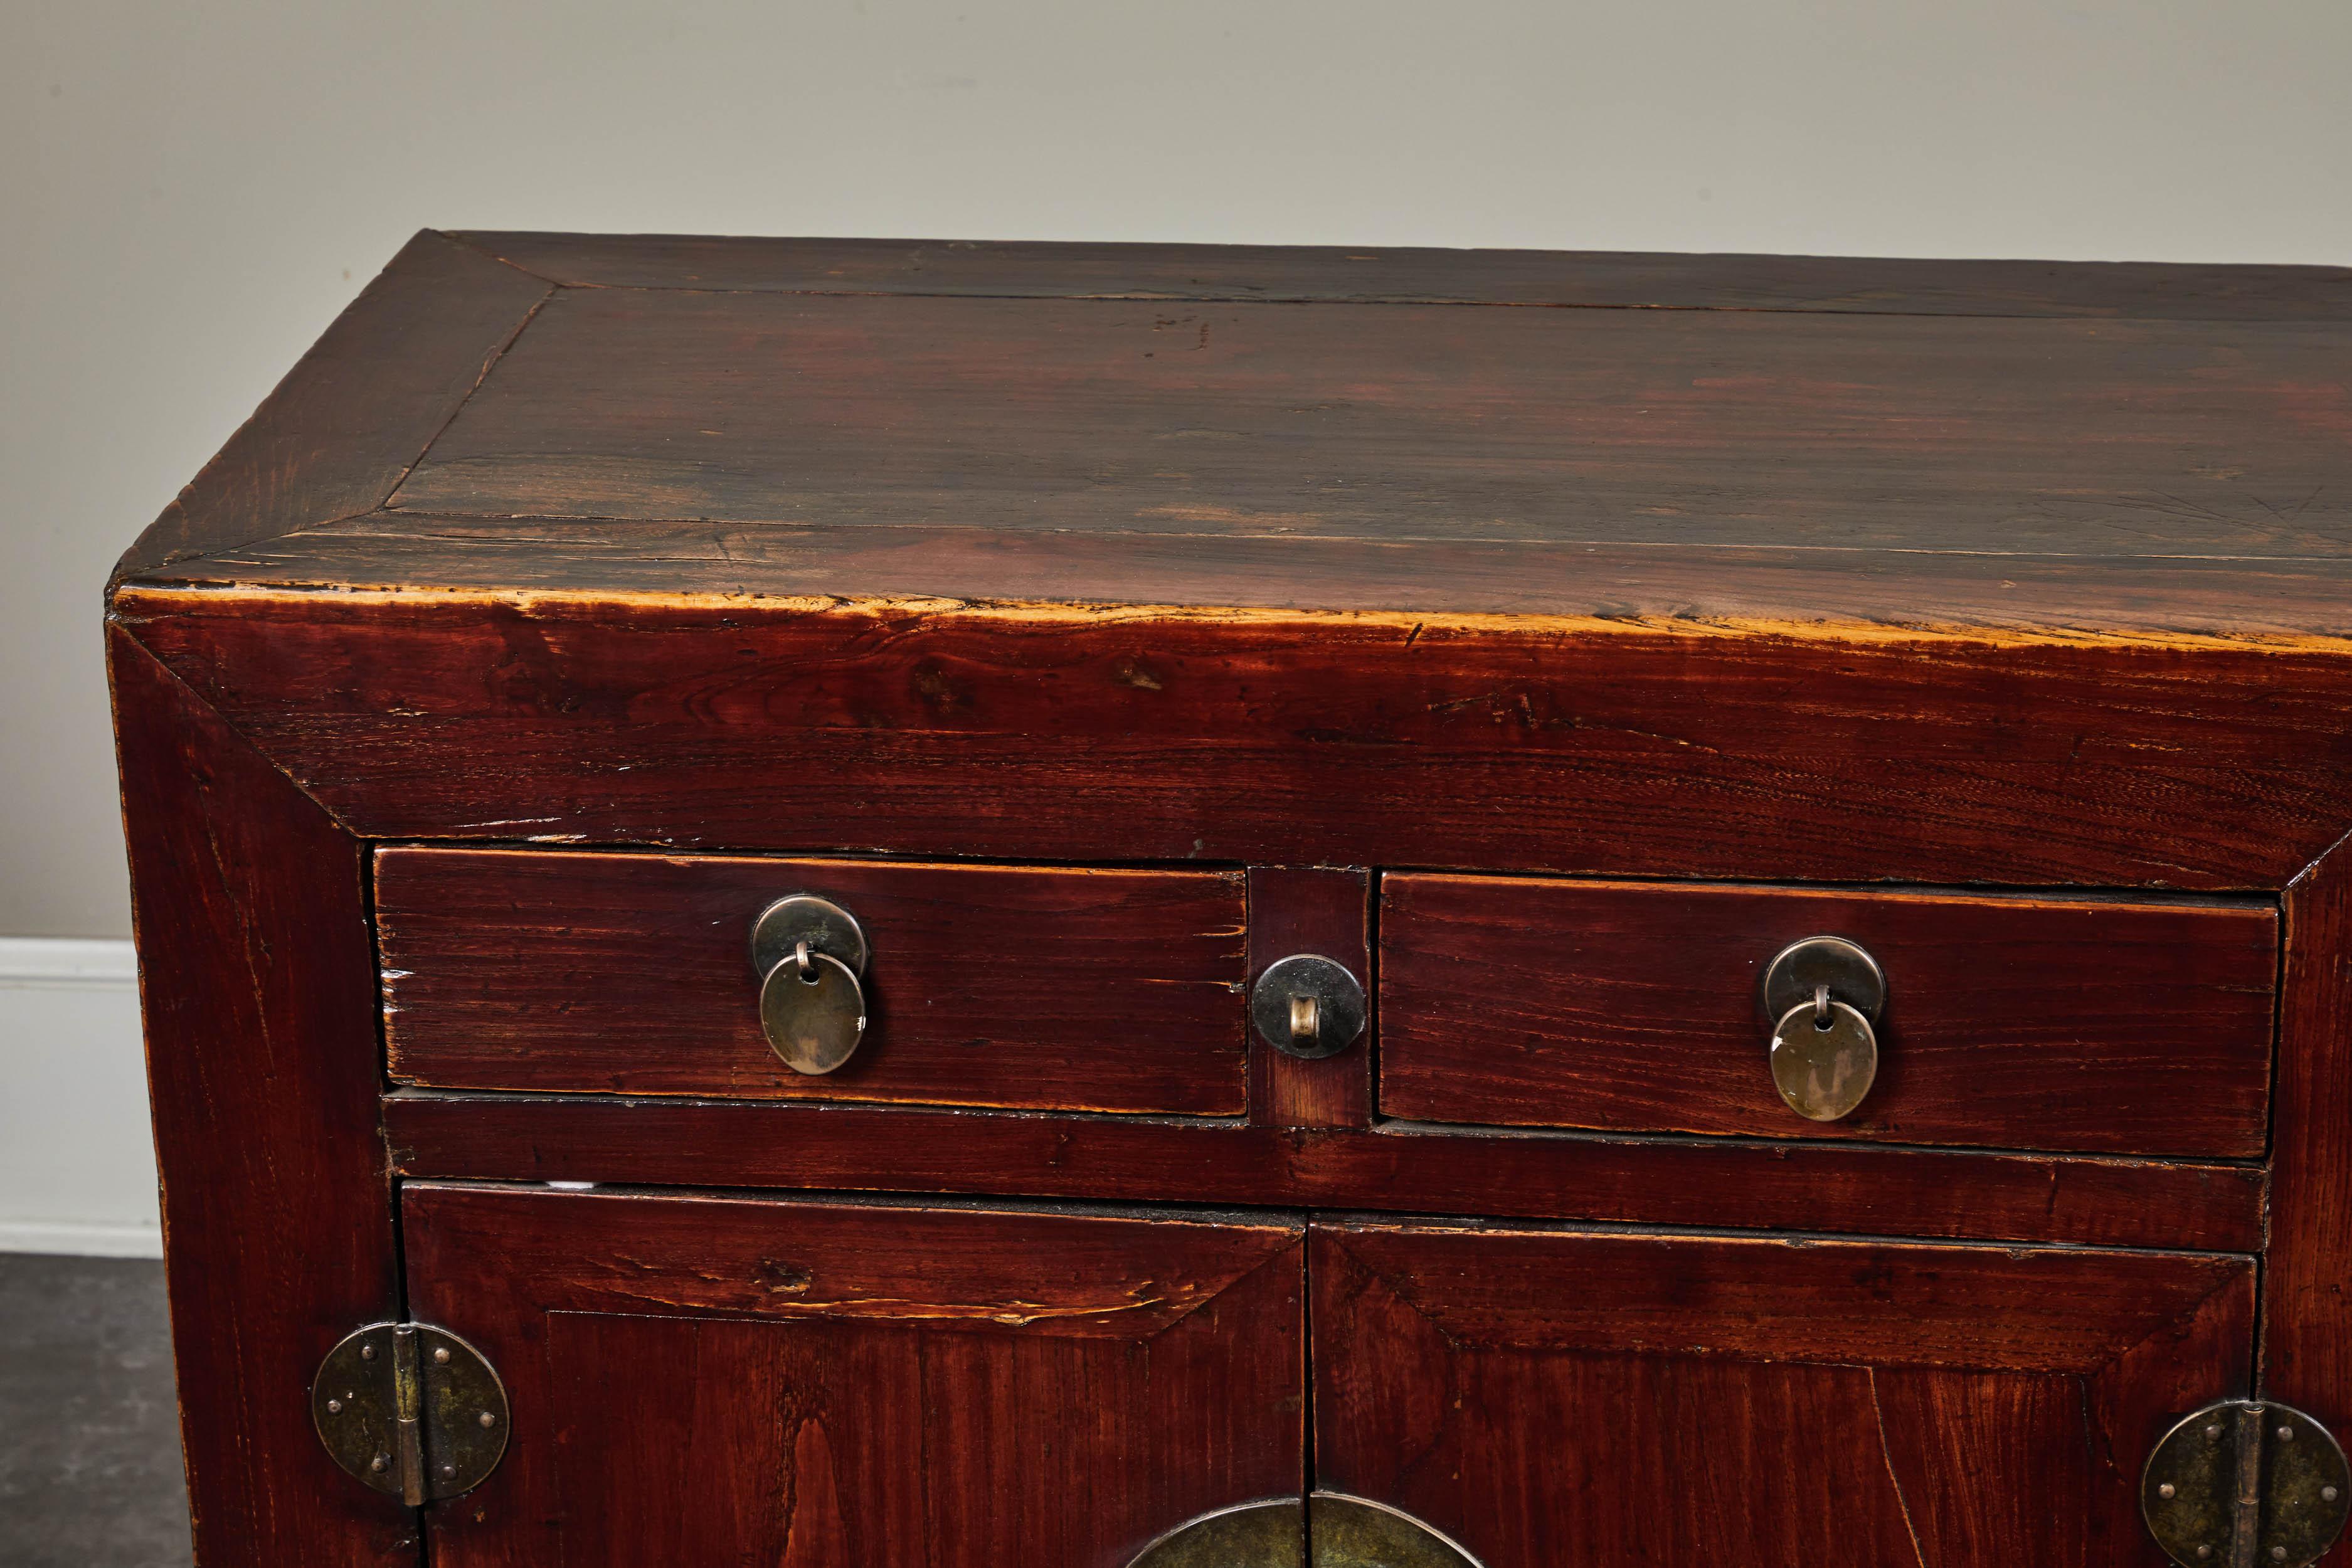 Four-door, four-drawer elm cabinet with original finish from Hebei, circa 19th century.